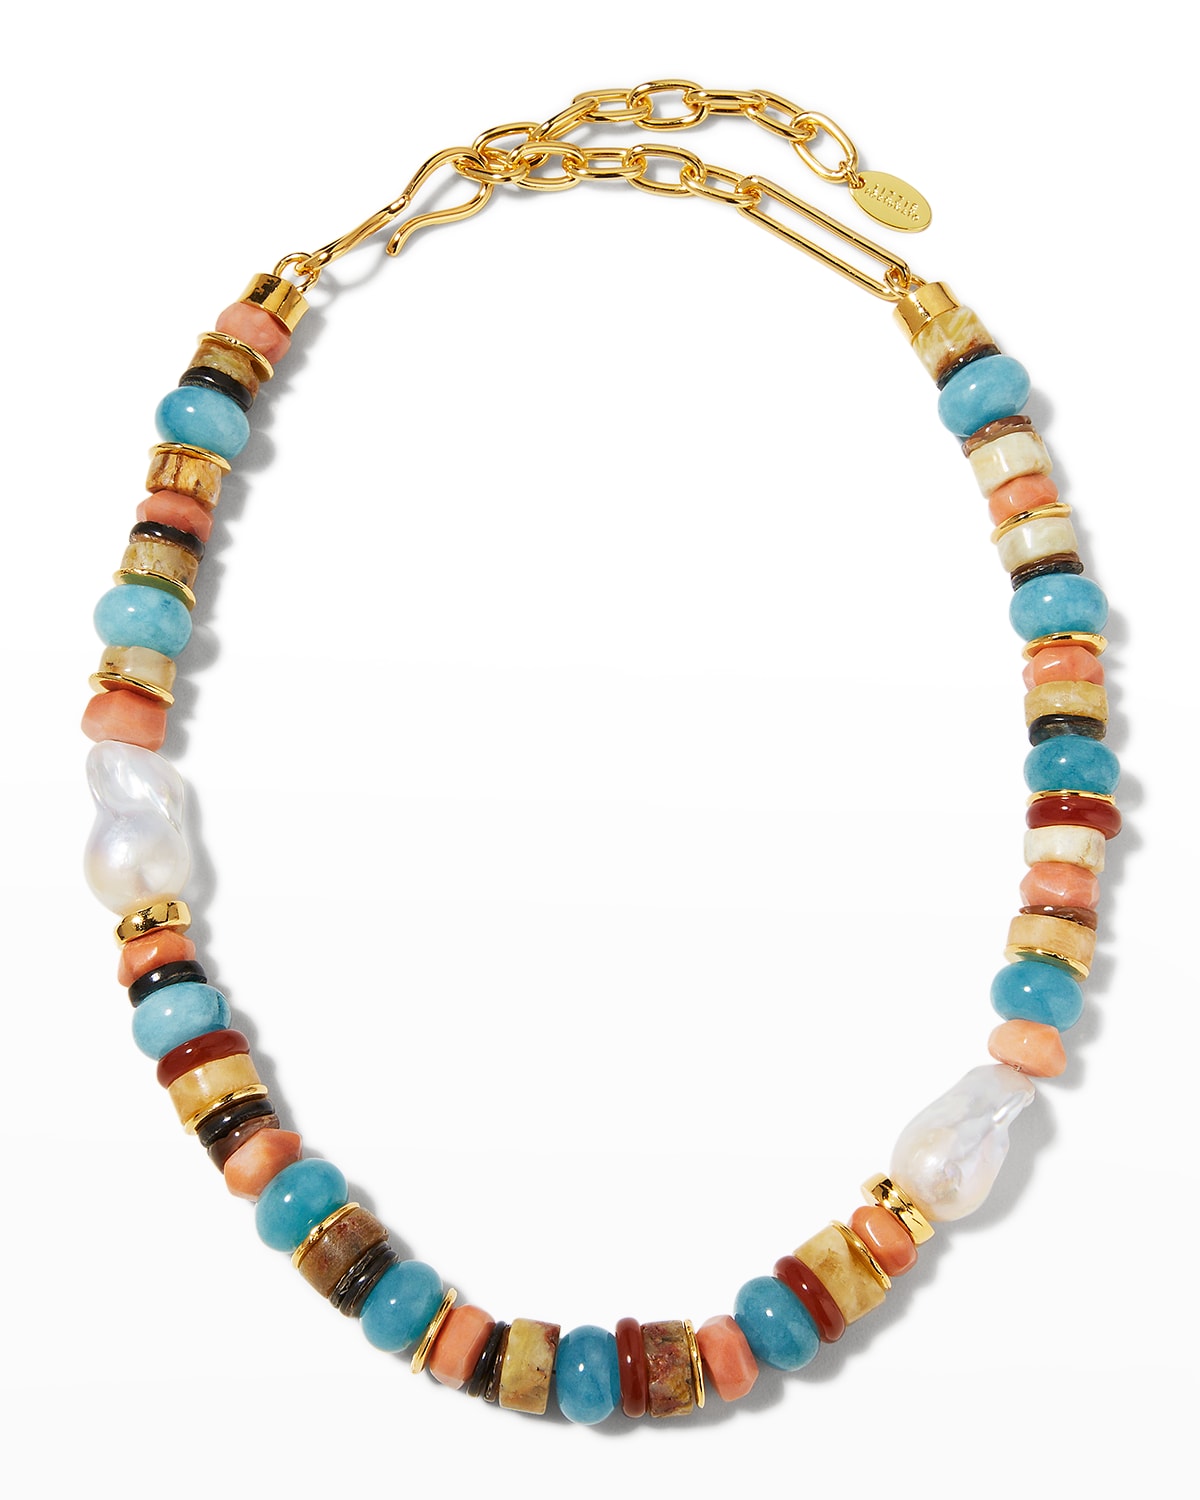 Lizzie Fortunato Botanic Pearl and Stone Necklace